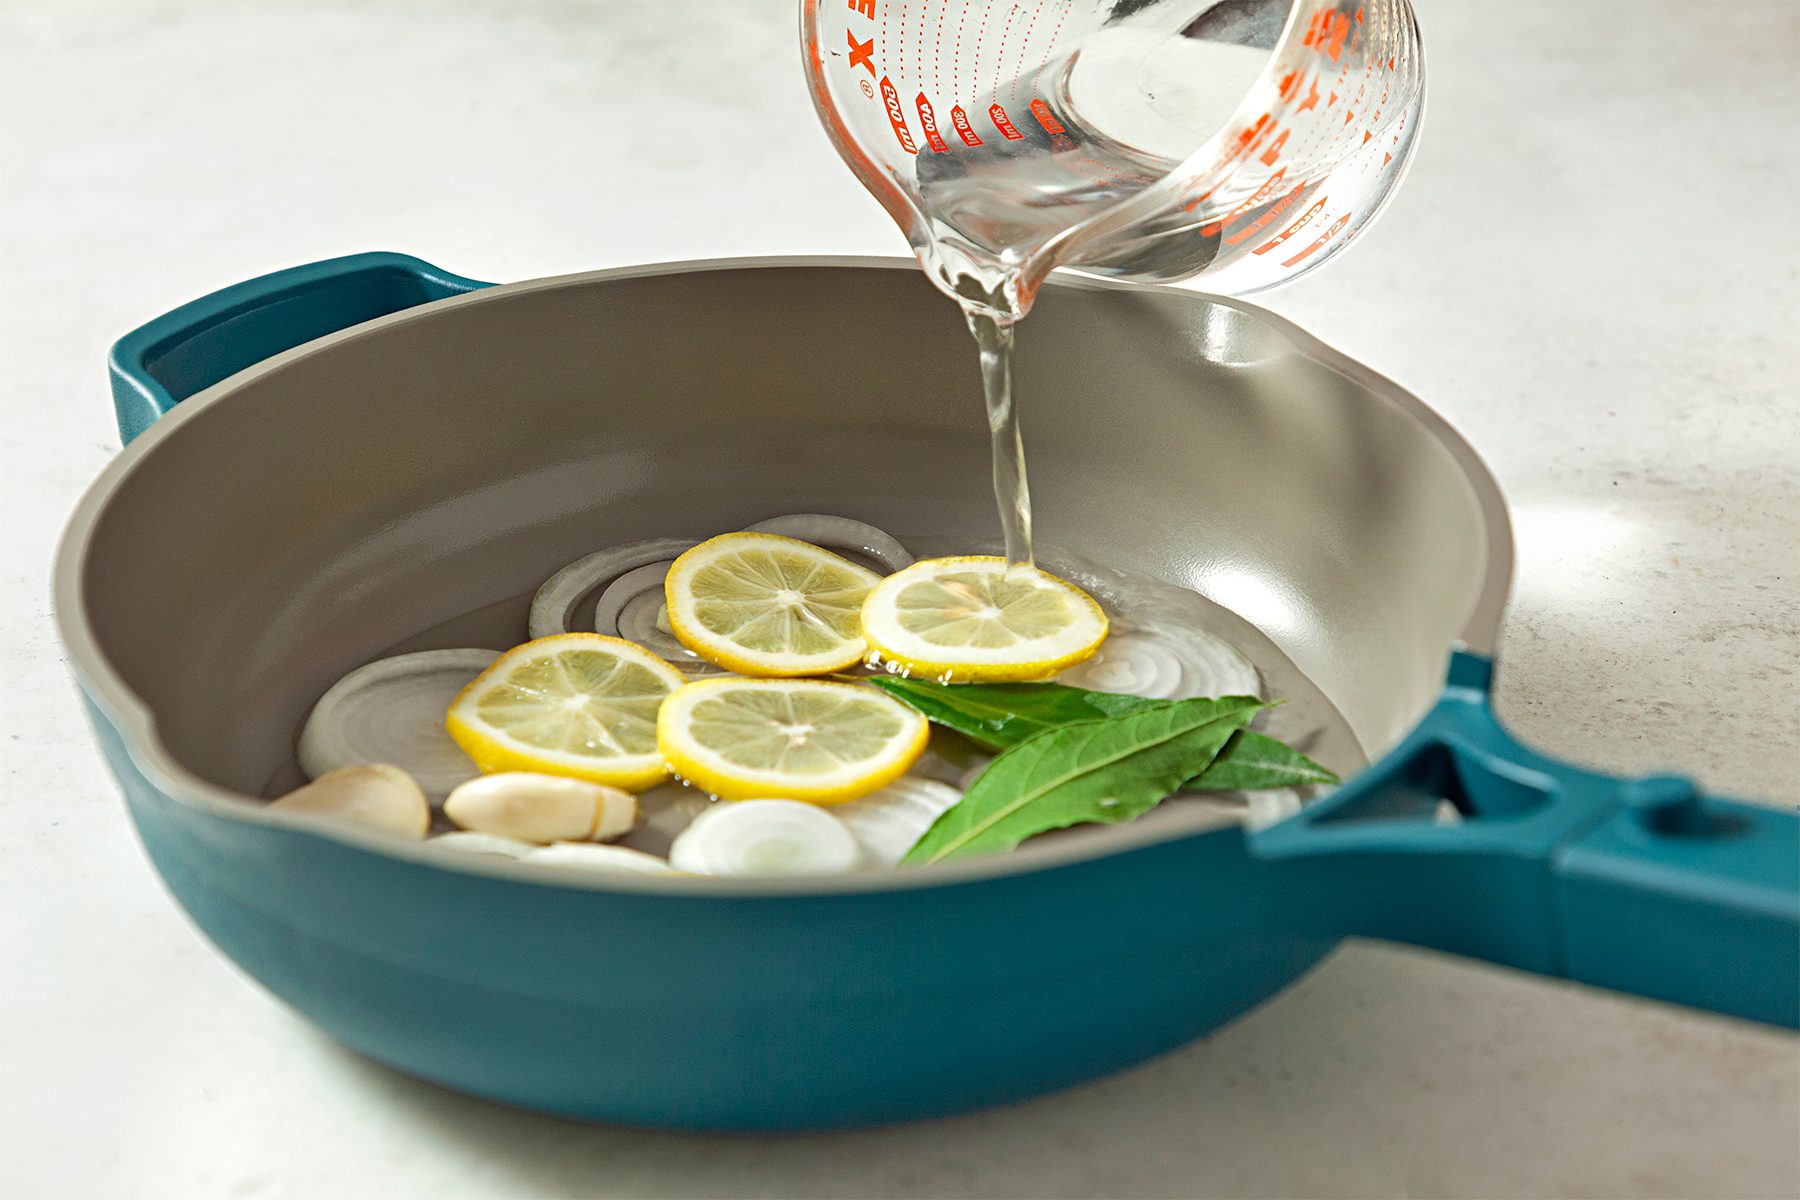 A turquoise frying pan with a non-stick interior contains sliced onions, lemon slices, garlic cloves, and bay leaves. A hand is pouring liquid from a measuring cup into the pan, 